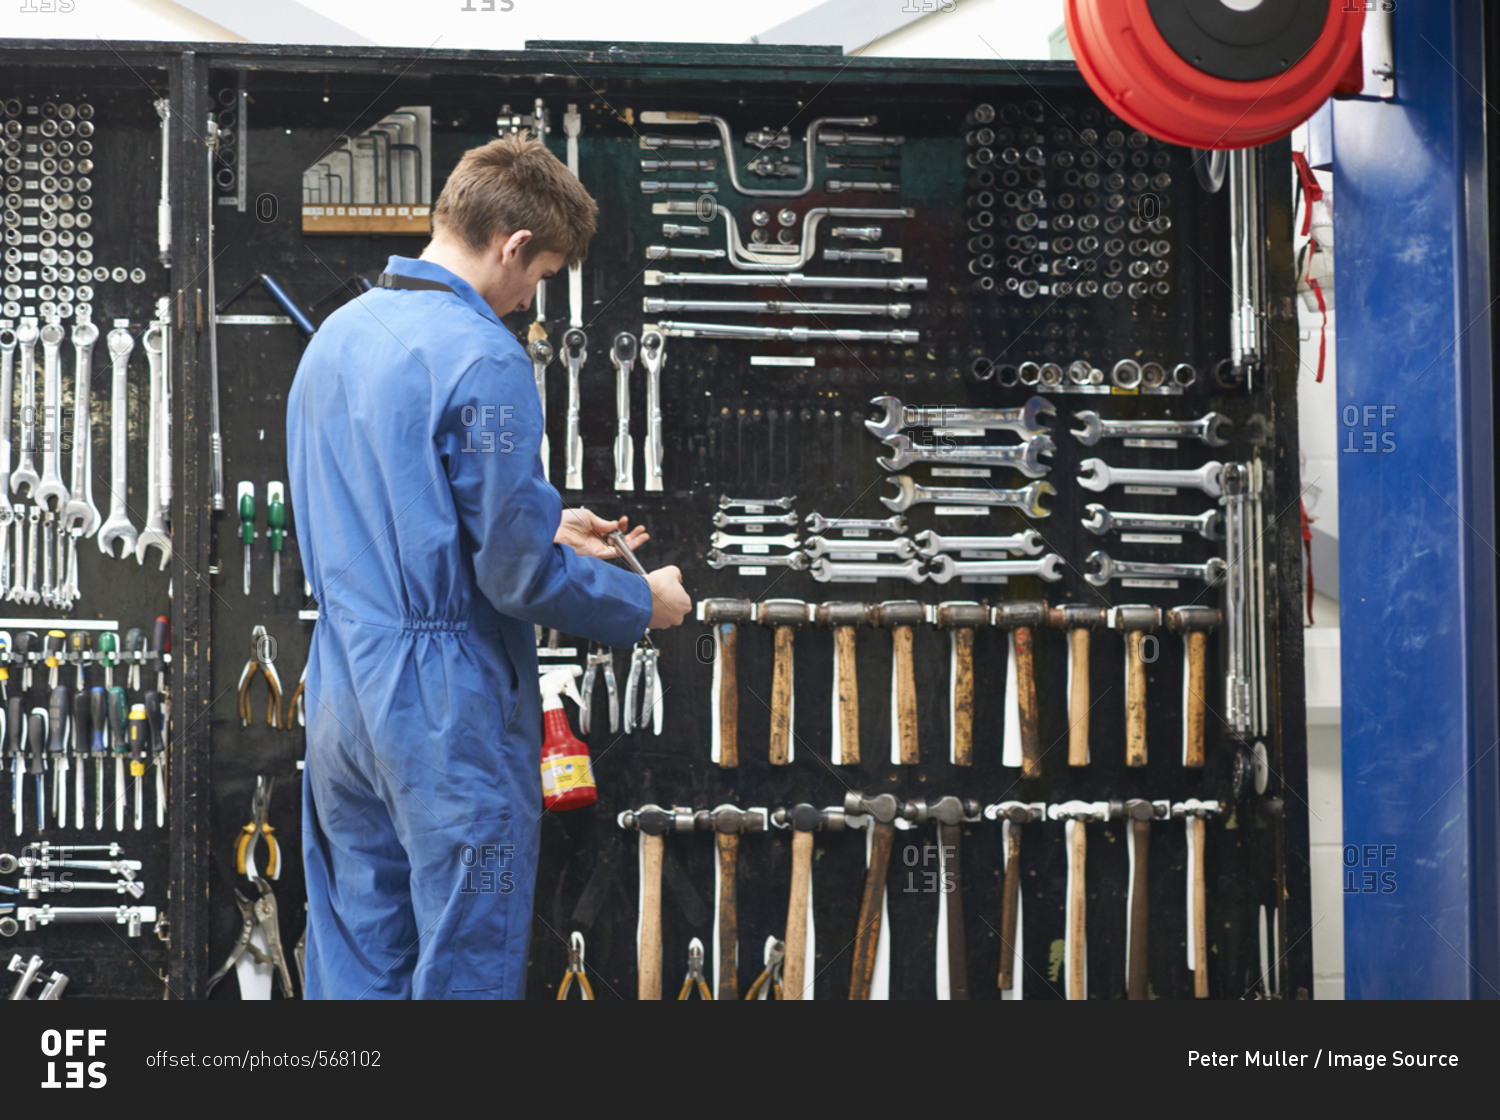 College mechanic student selecting wrench from repair garage tool kit